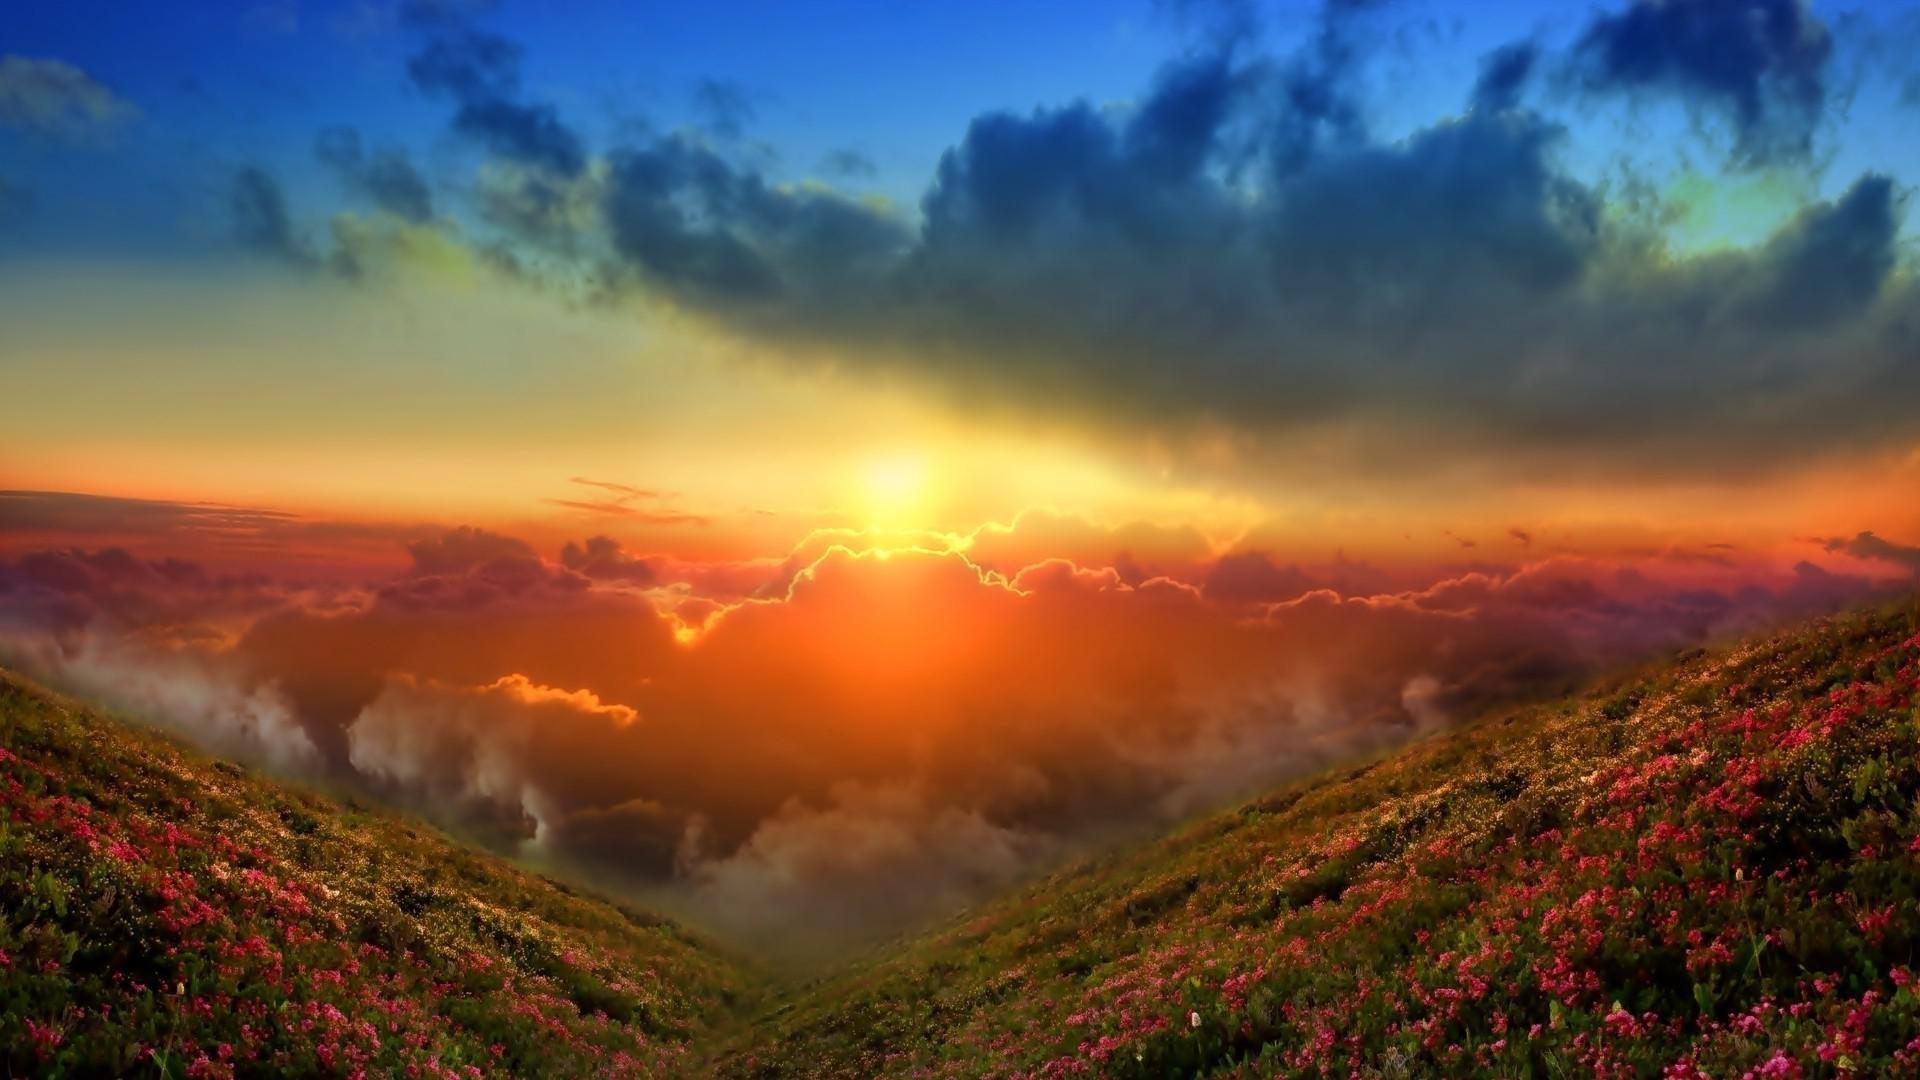 Magnificent sunrise - - High Quality and Resolution